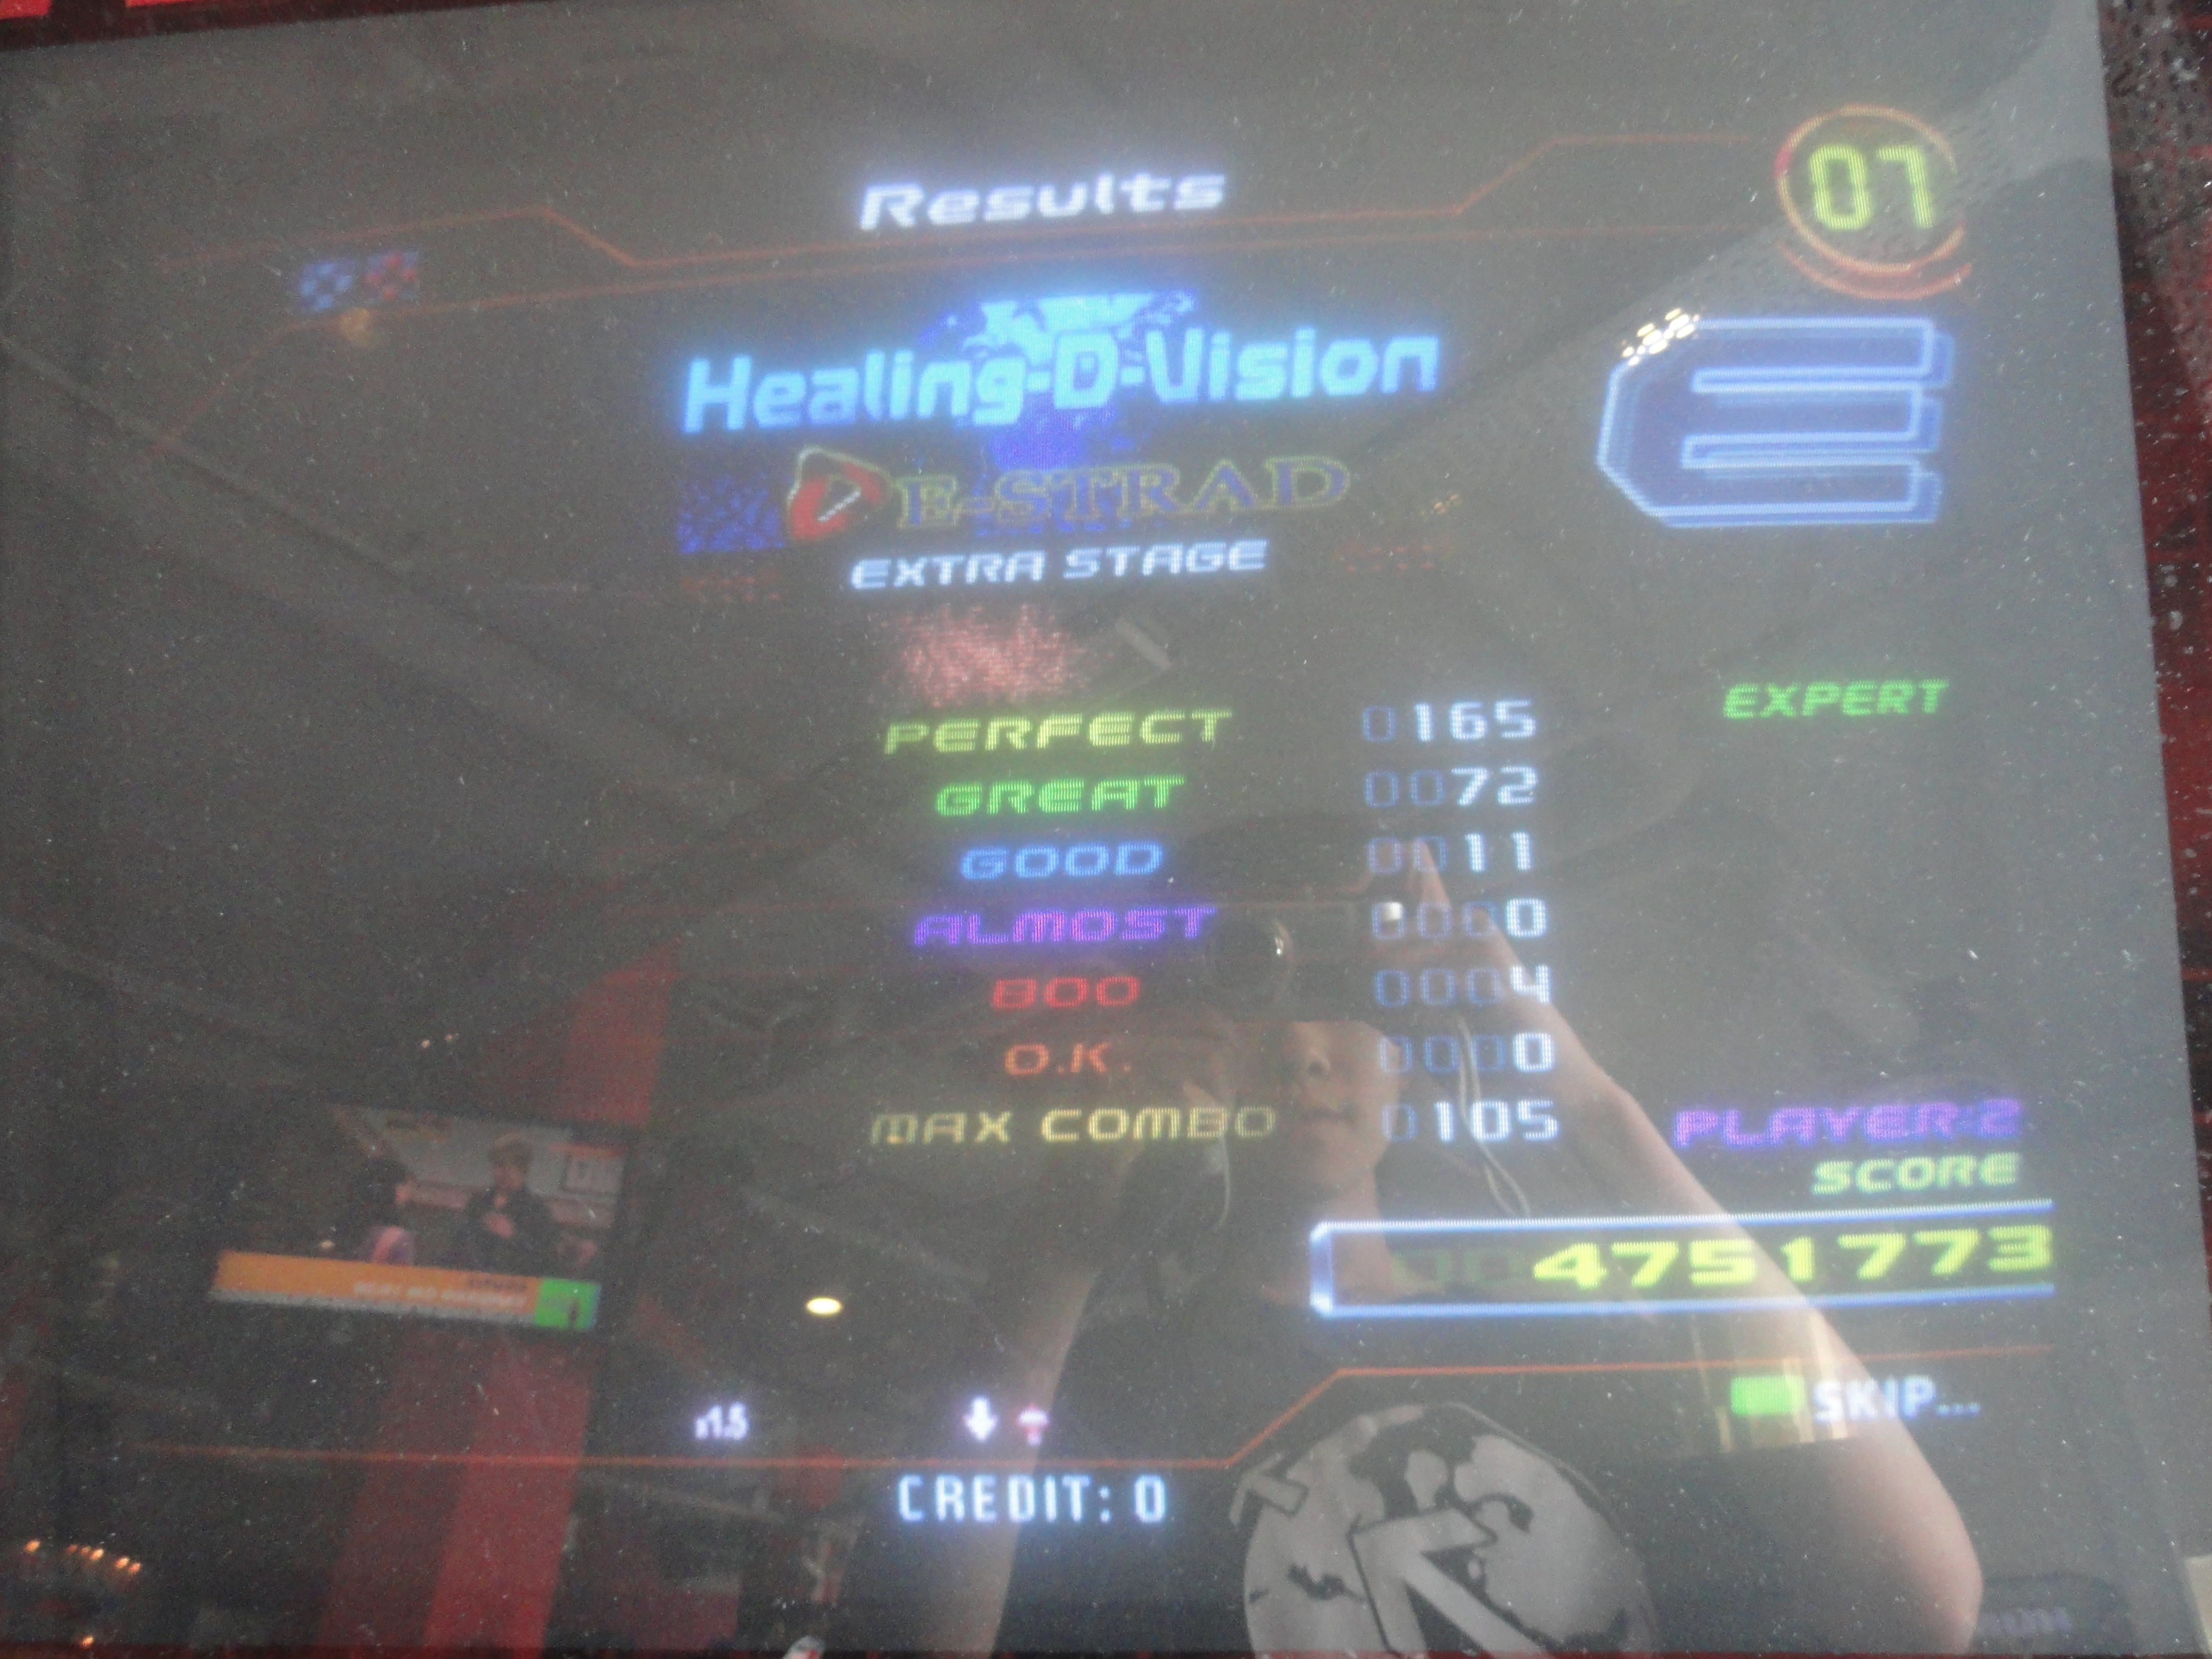 Healing-D-Vision // Expert Failed, EXTRA STAGE // DS SN